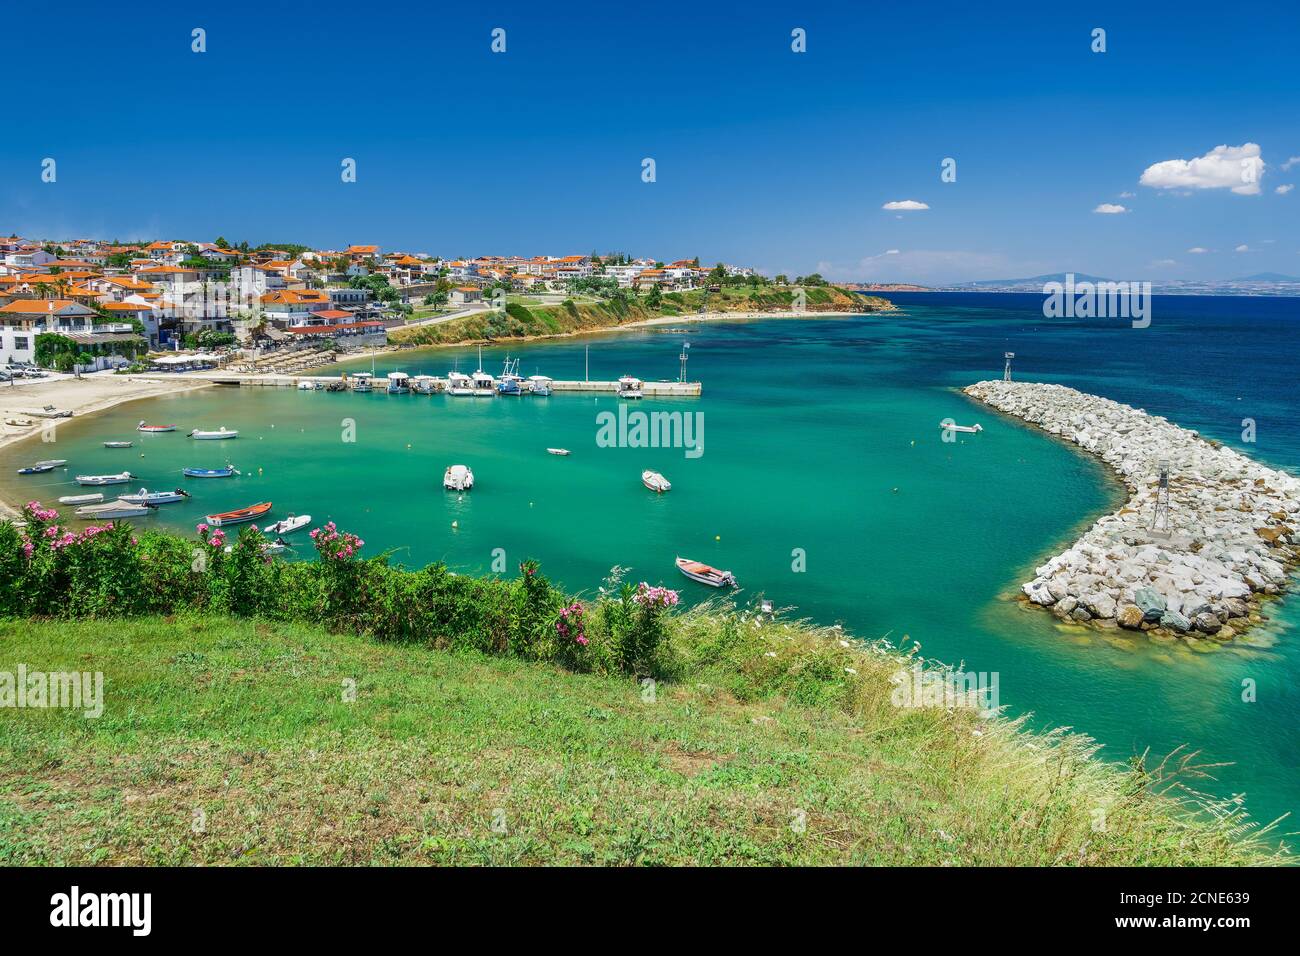 Coastal village with fishing port, hilltop view of Nea Fokaia at Kassandra peninsula with low rise buildings, Chalkidiki, Greece, Europe Stock Photo